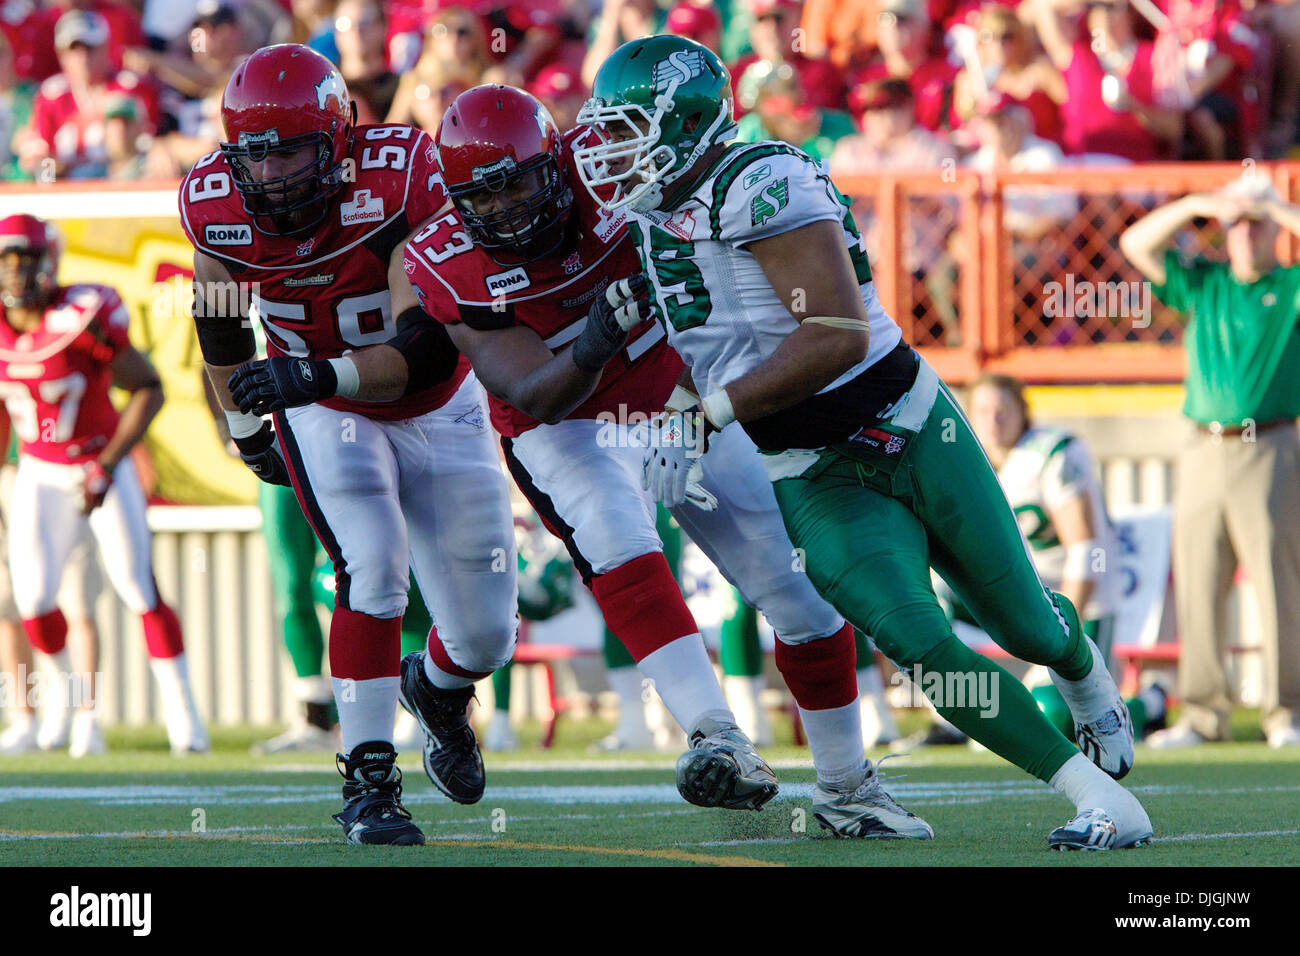 Calgary Stampeders offensive lineman Edwin Harrison (53) moves to block Saskatchewan Roughriders defensive end Luc Mullinder (95) during a game at McMahon Stadium in Calgary, Alberta. (Credit Image: © Irena Thompson/Southcreek Global/ZUMApress.com) Stock Photo